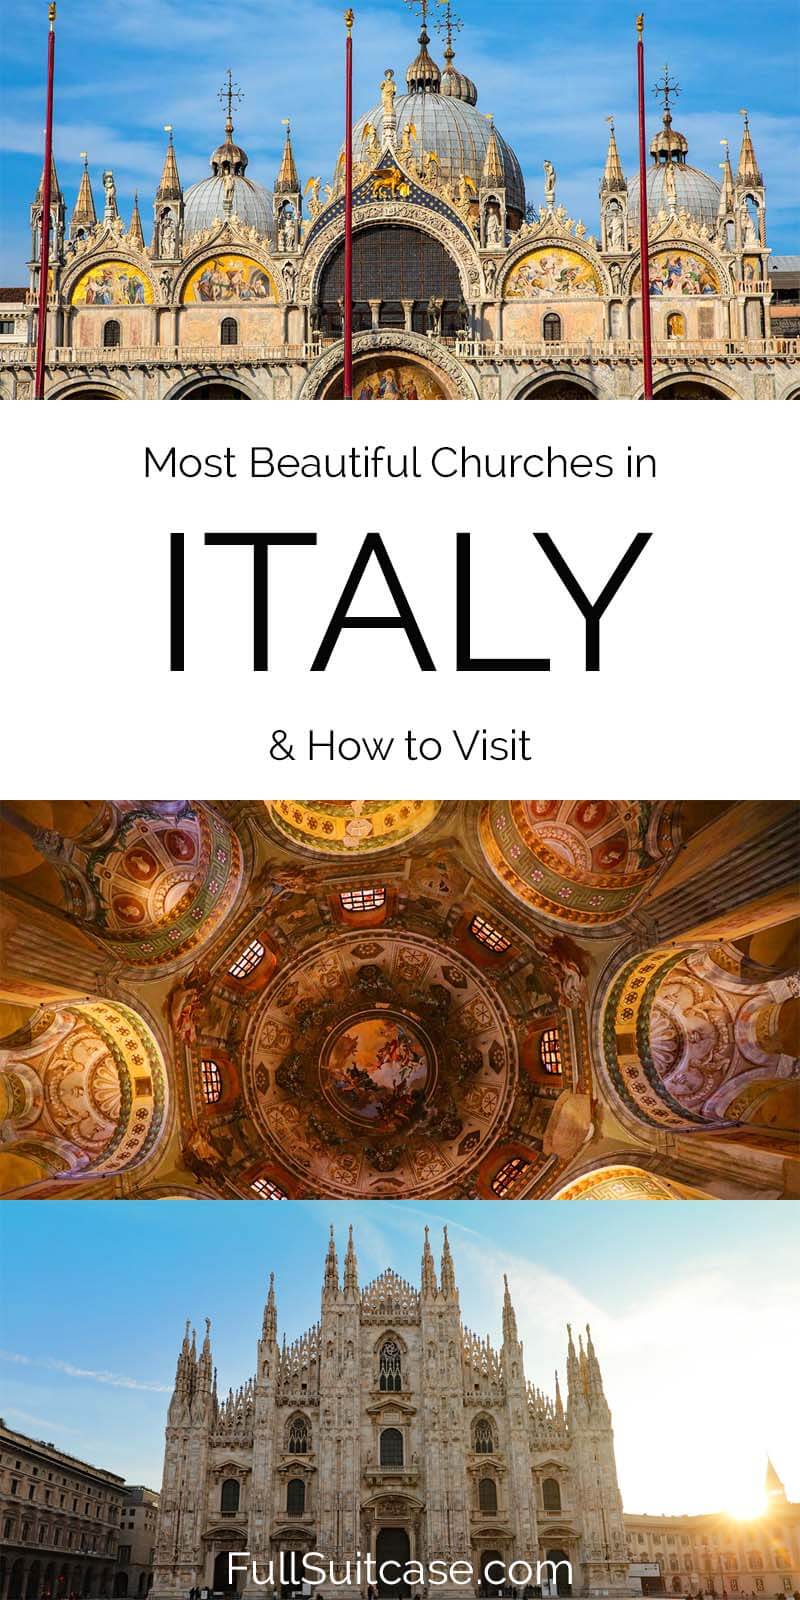 Most beautiful cathedrals and churches to visit in Italy